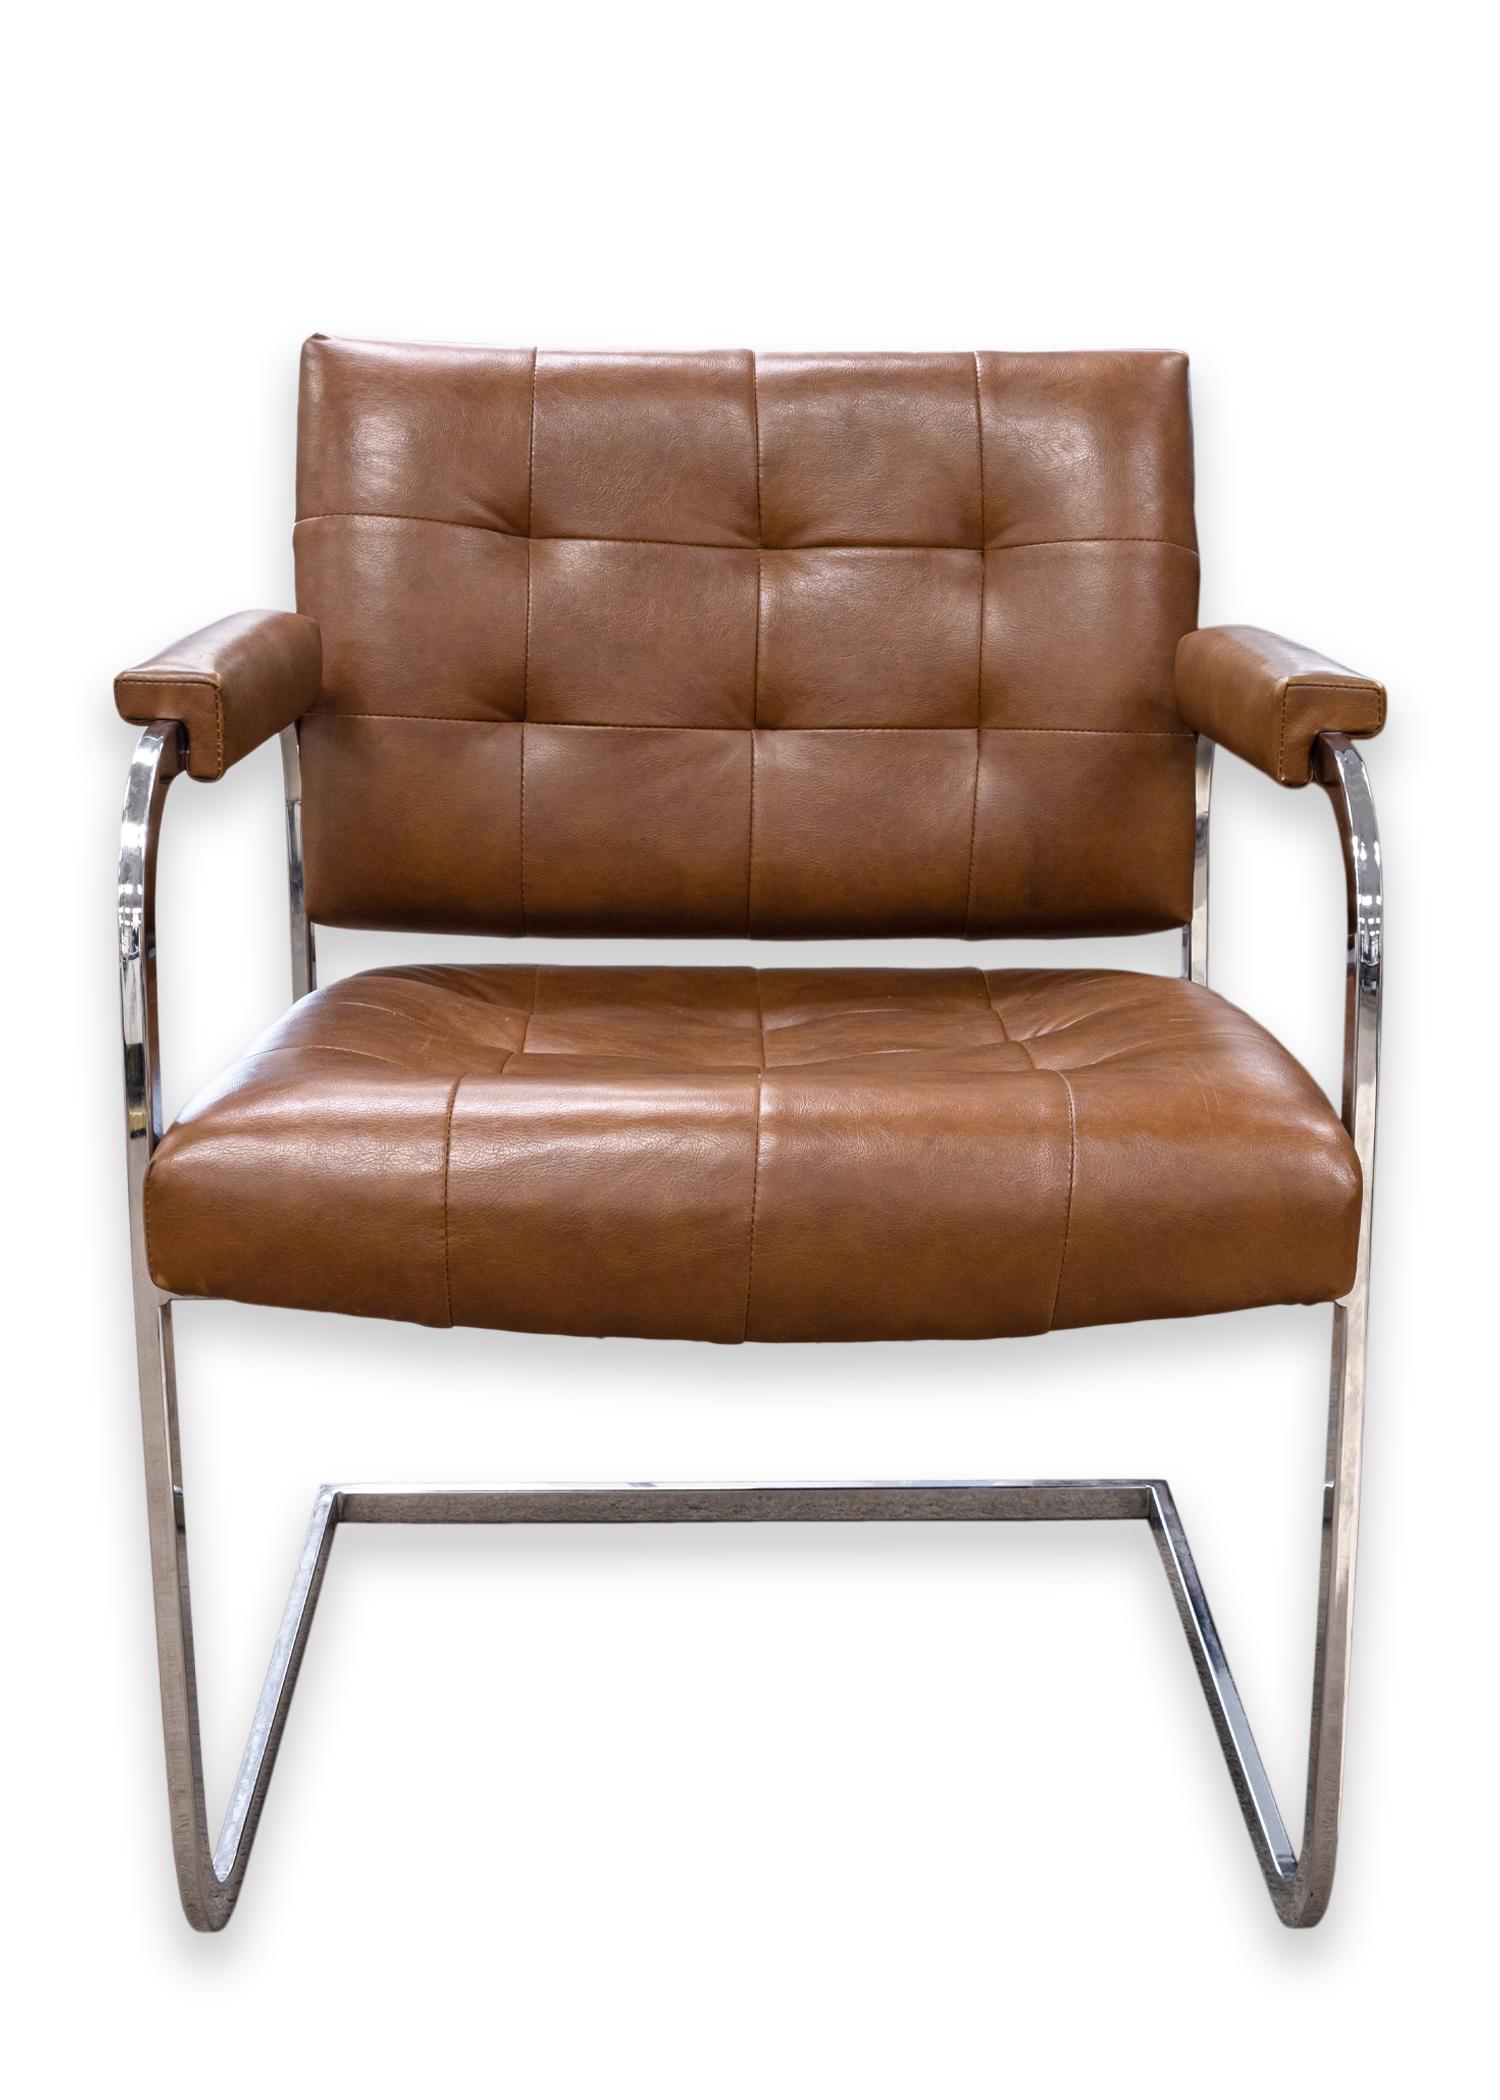 A pair of Patrician Furniture Company cantilever chairs. A wonderful set of brown tufted leather and chrome cantilever chairs. These beautiful chairs have padded armrests, seats and backs. They are super comfortable and super stylish. A really